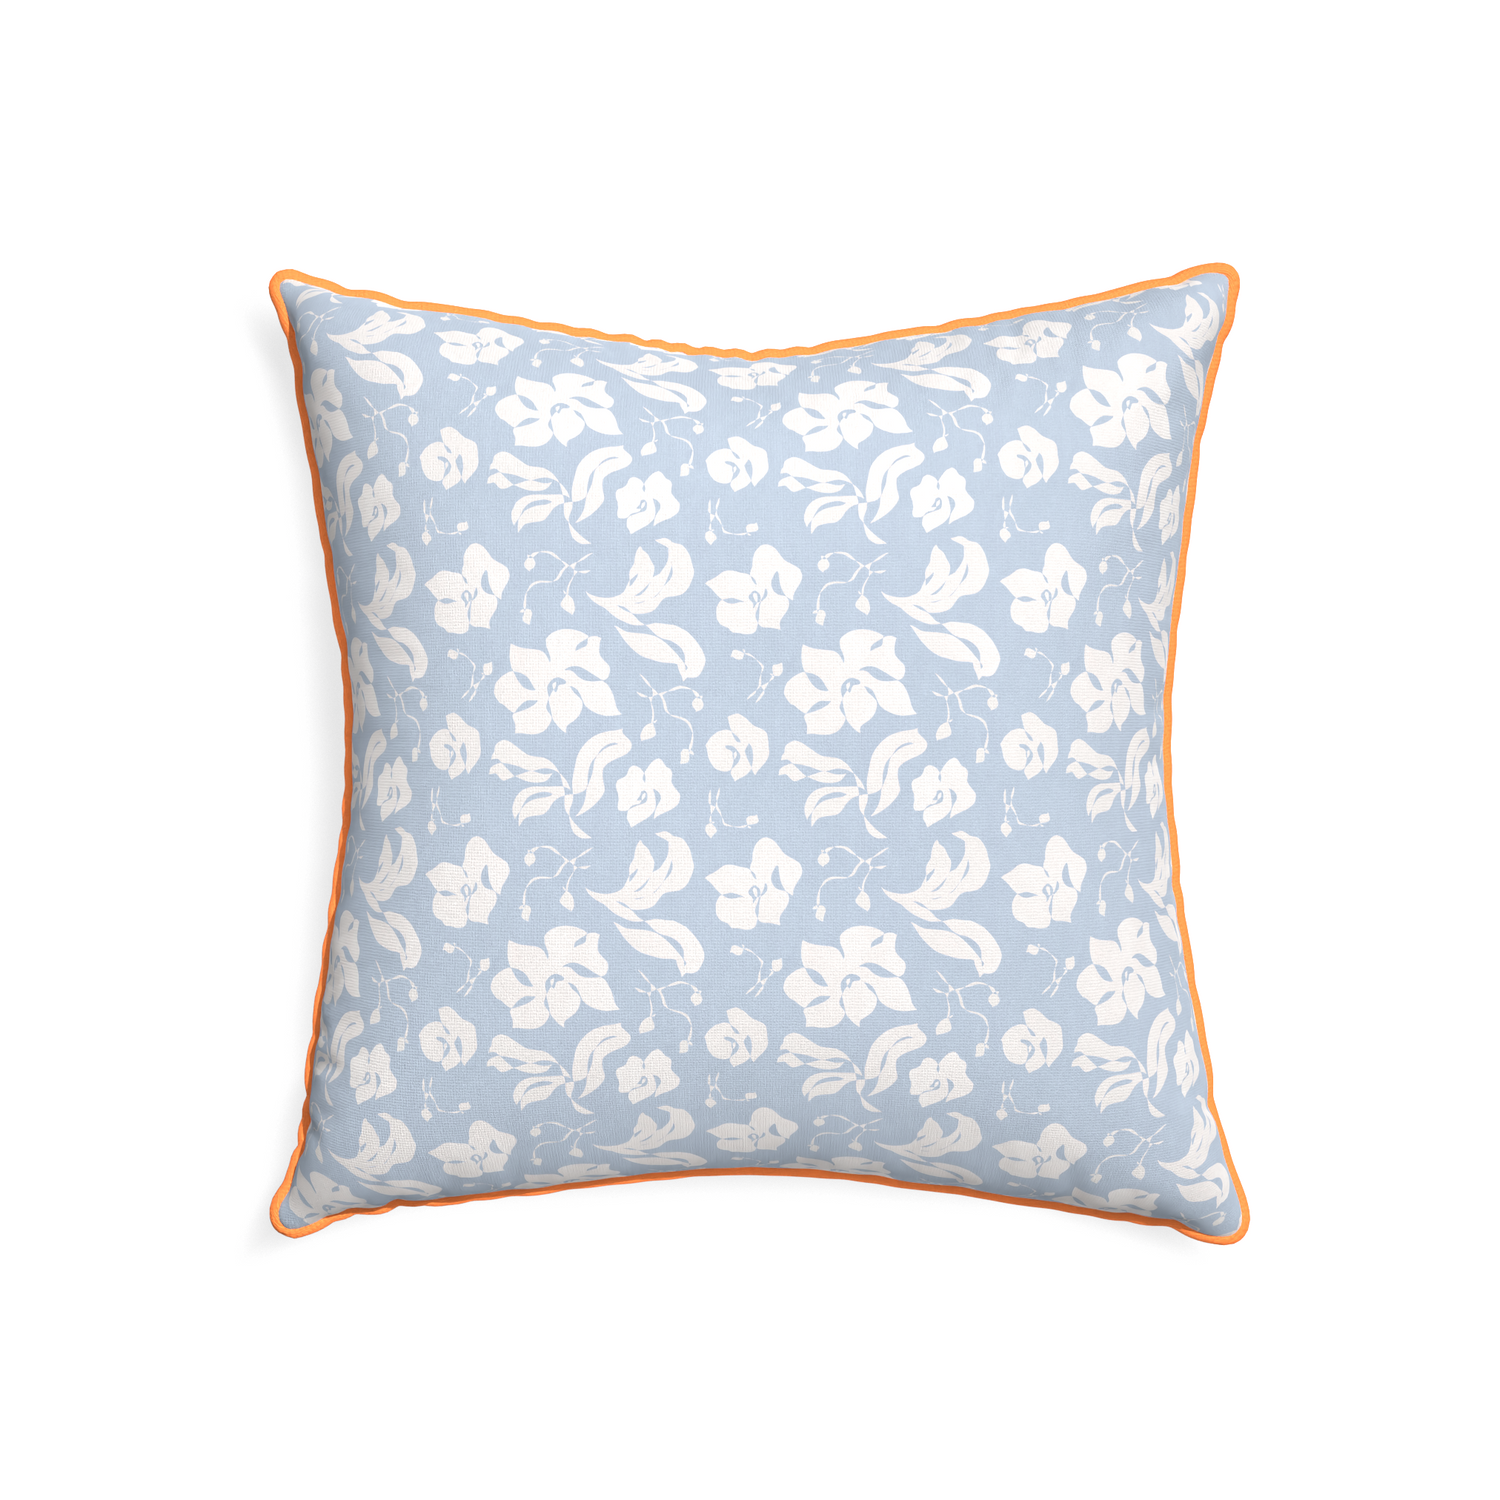 22-square georgia custom cornflower blue floralpillow with clementine piping on white background